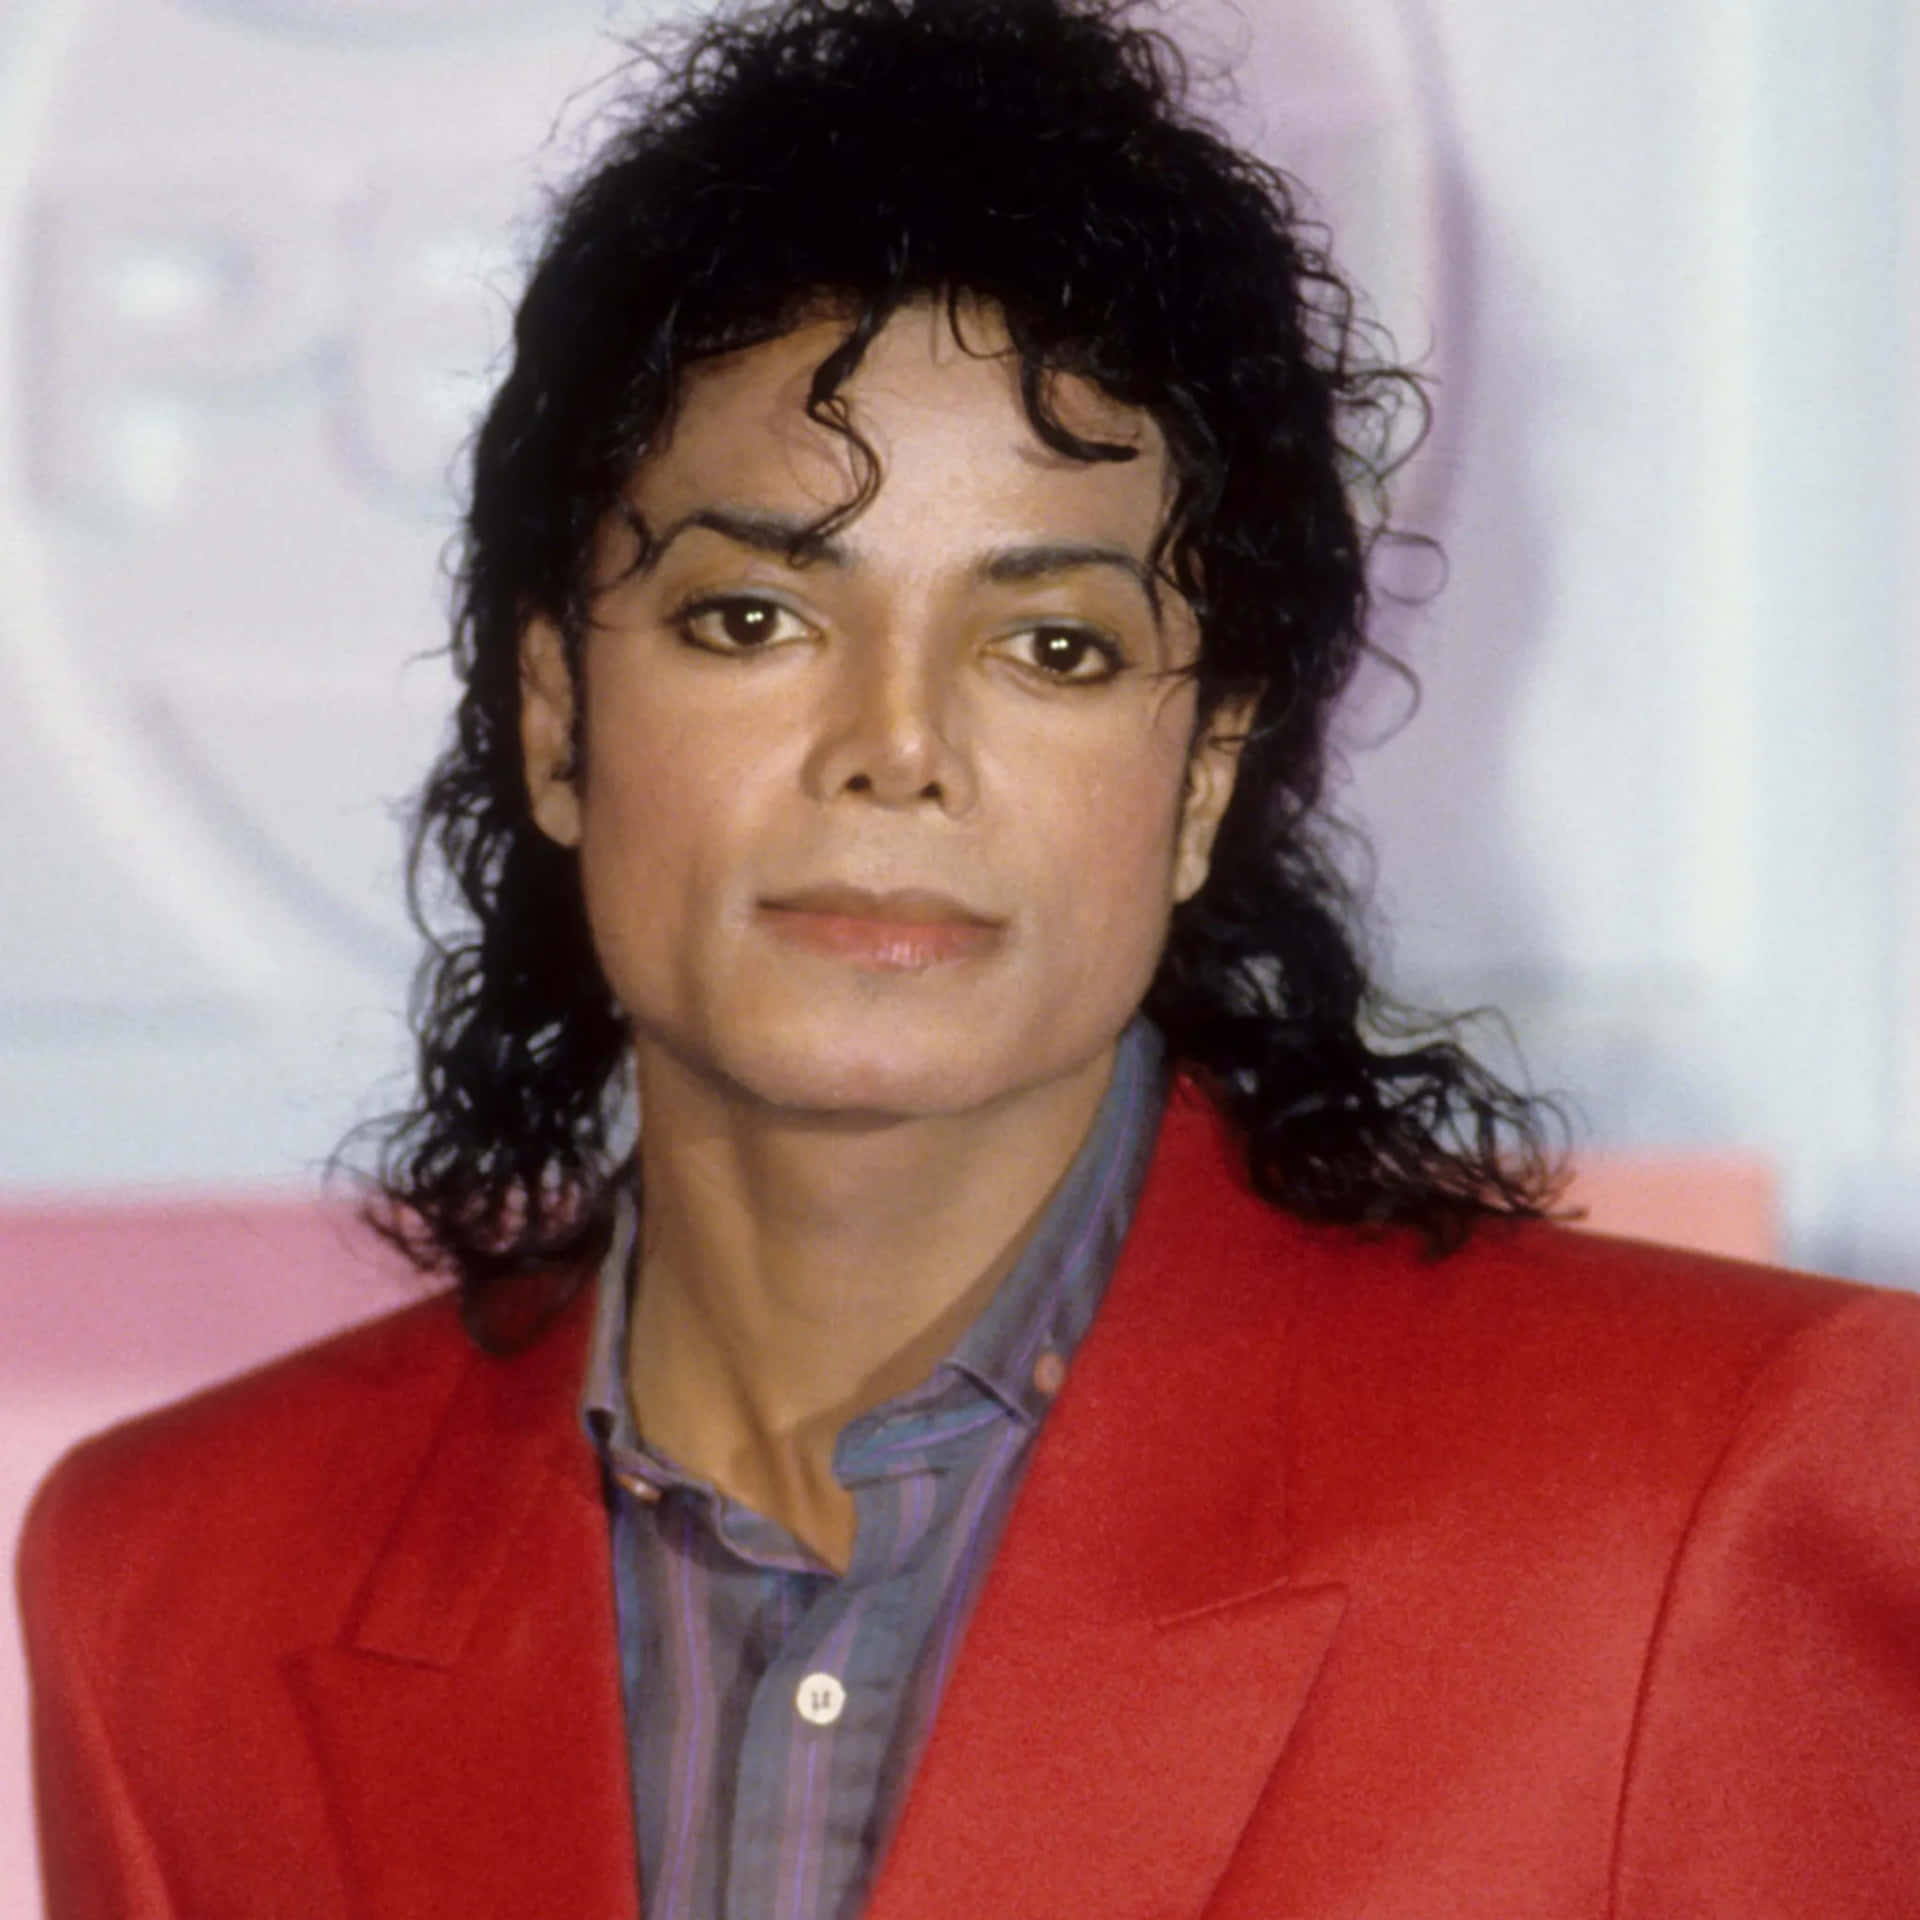 The late King Of Pop, Michael Jackson.